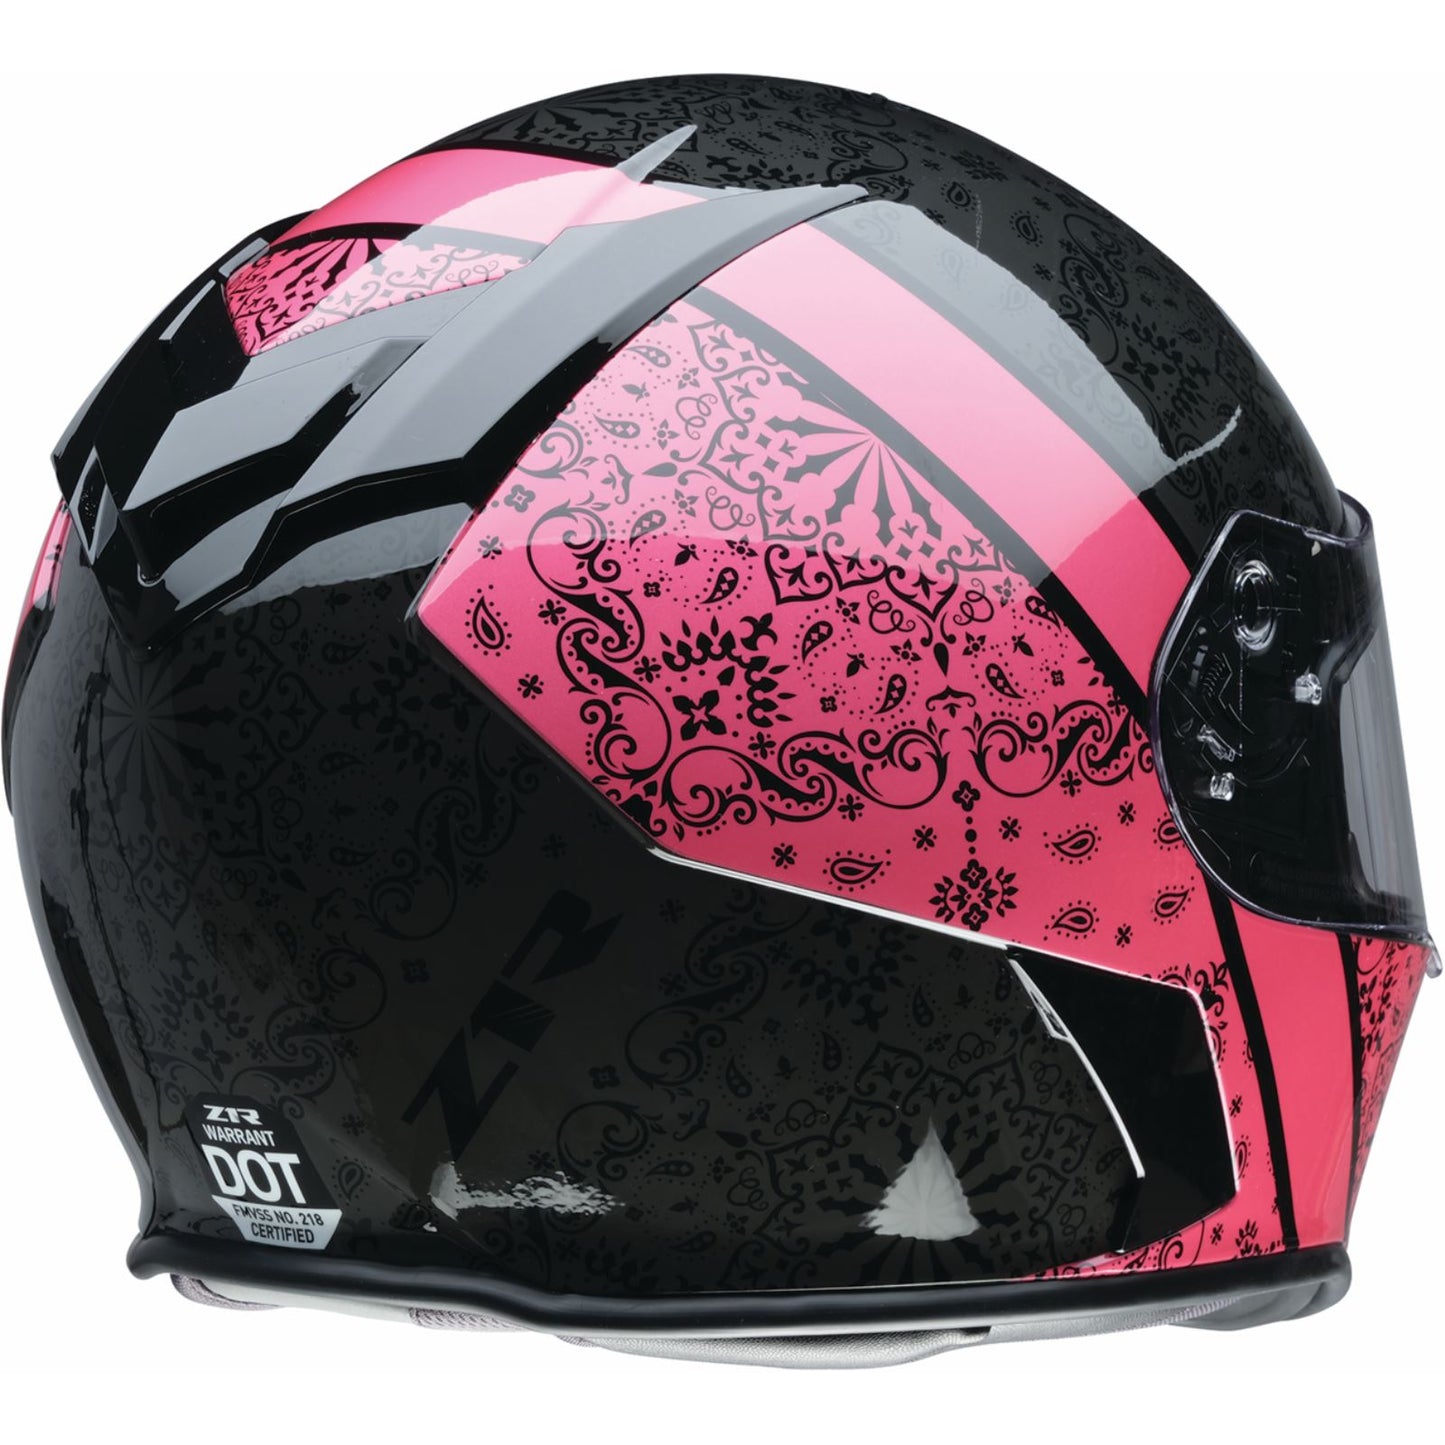 Z1R Warrant PAC Pink Full Face Helmet - Available In-Store Only